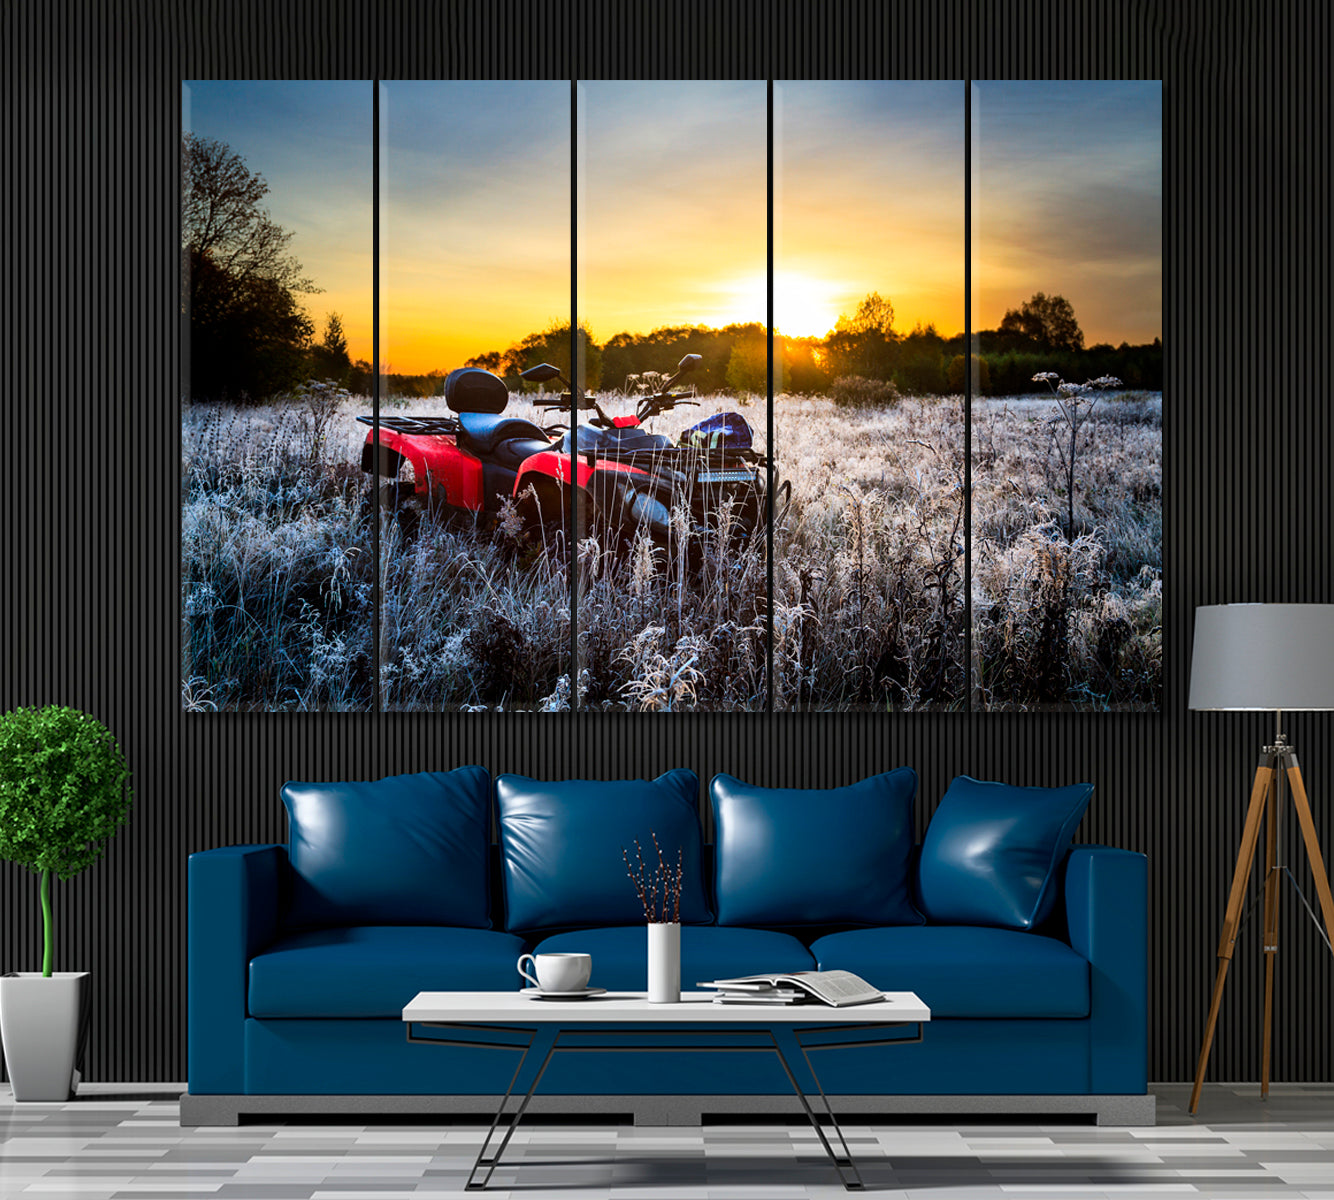 Quad Bike in Field at Sunrise Canvas Print ArtLexy 5 Panels 36"x24" inches 